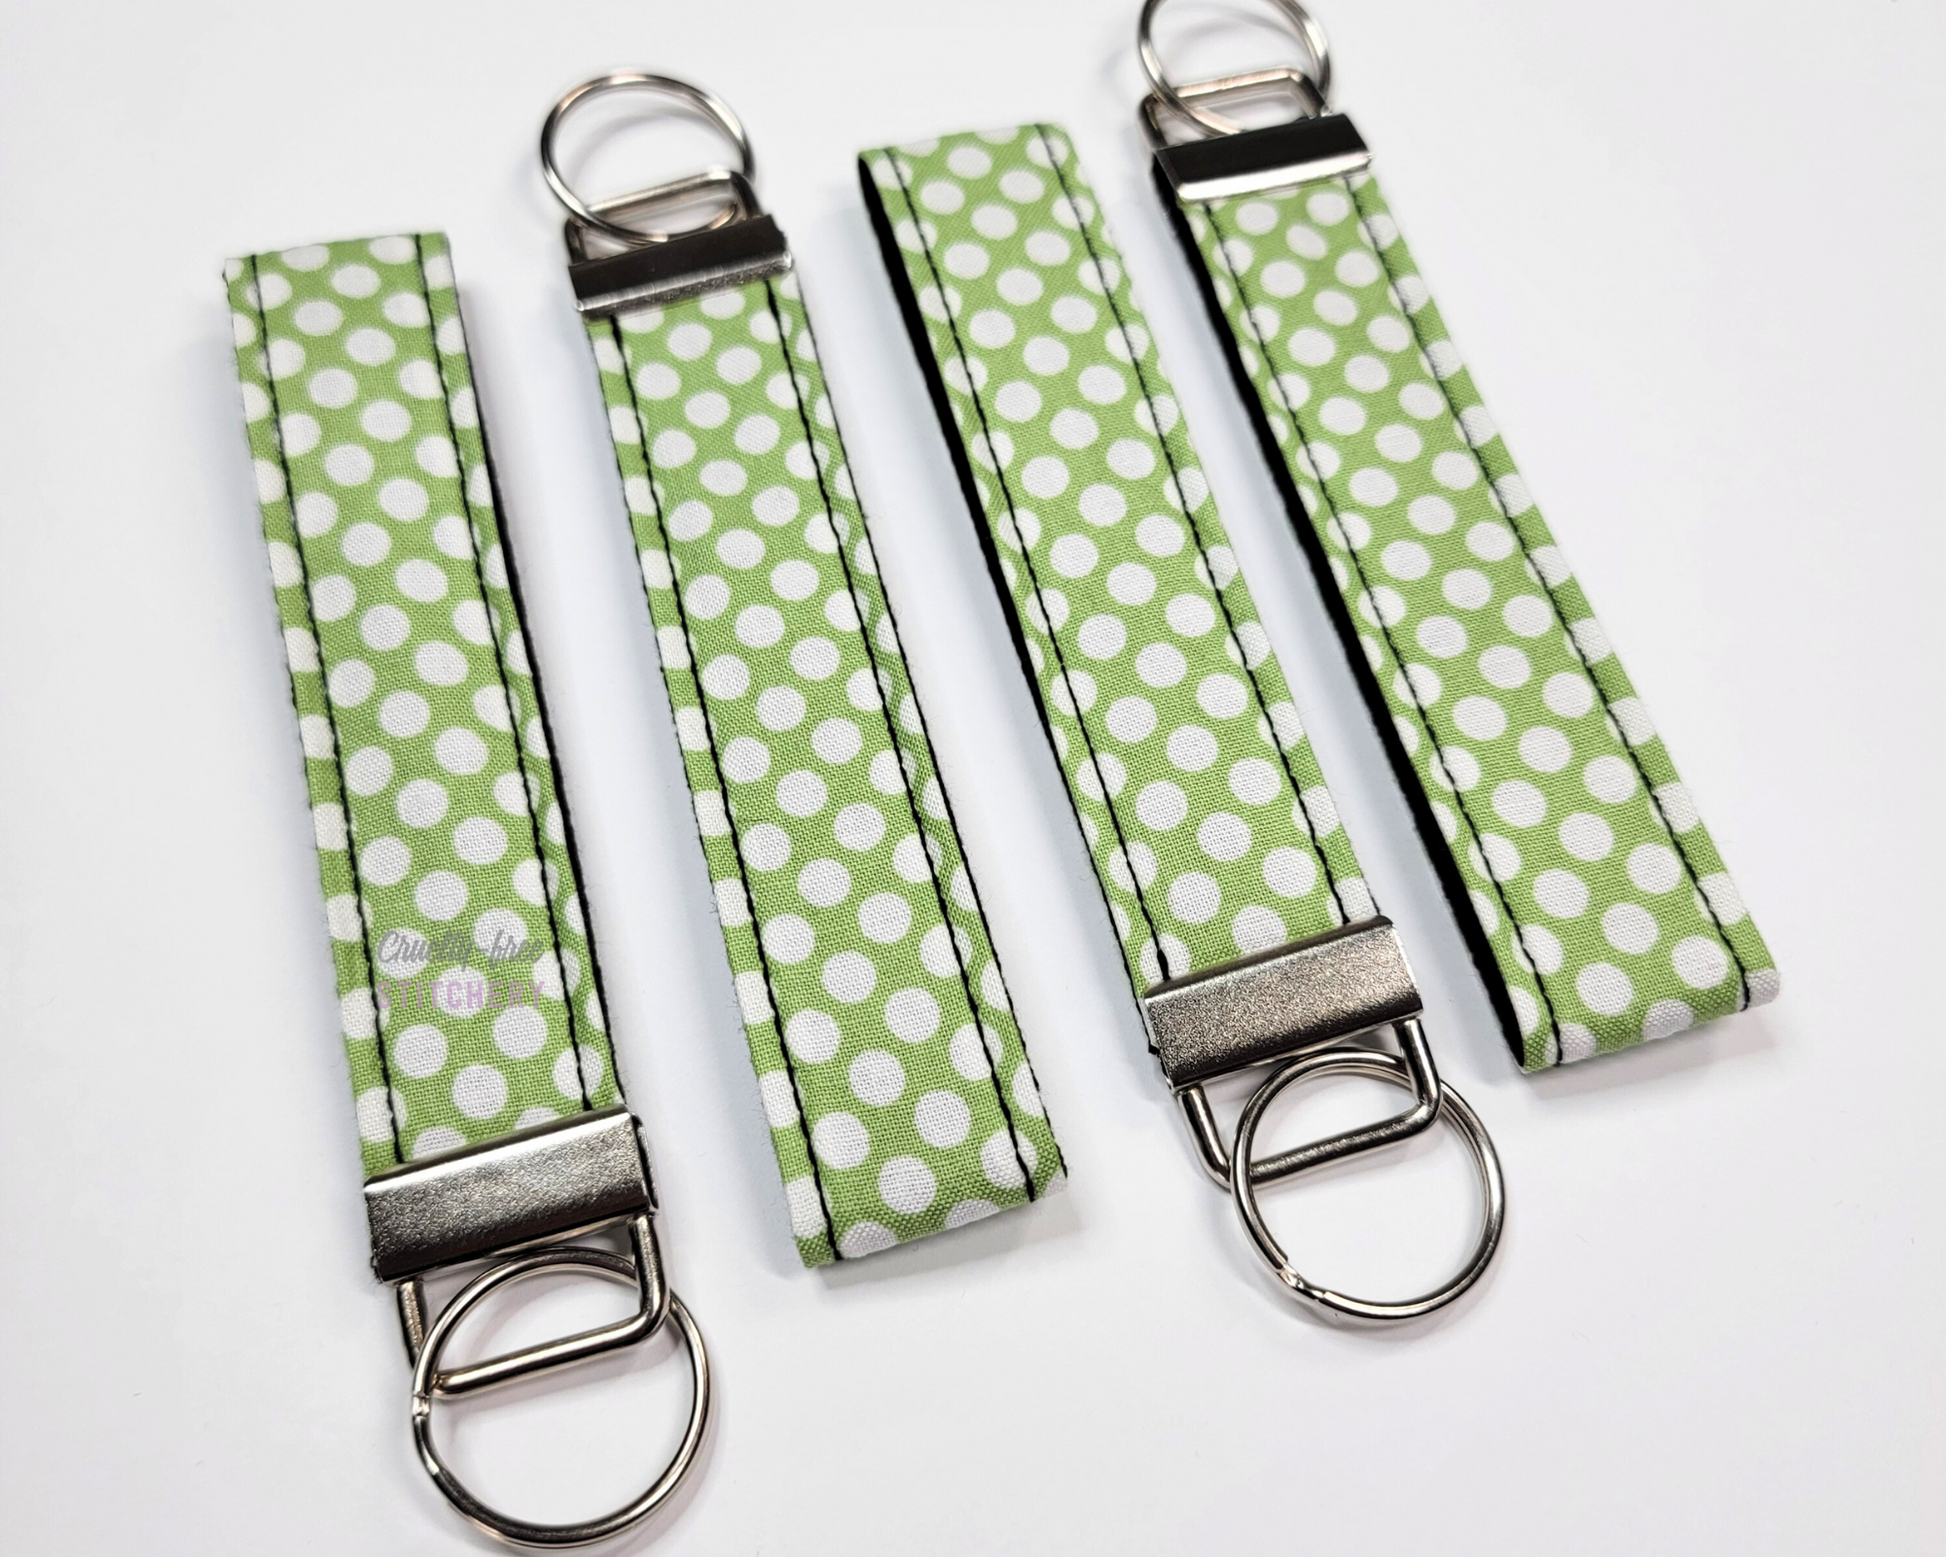 Wristlet key fobs arranged in a row of four with ends alternating. The wristlet is green fabric that has closely-packed white dots printed on. The hardware and key ring are silver.